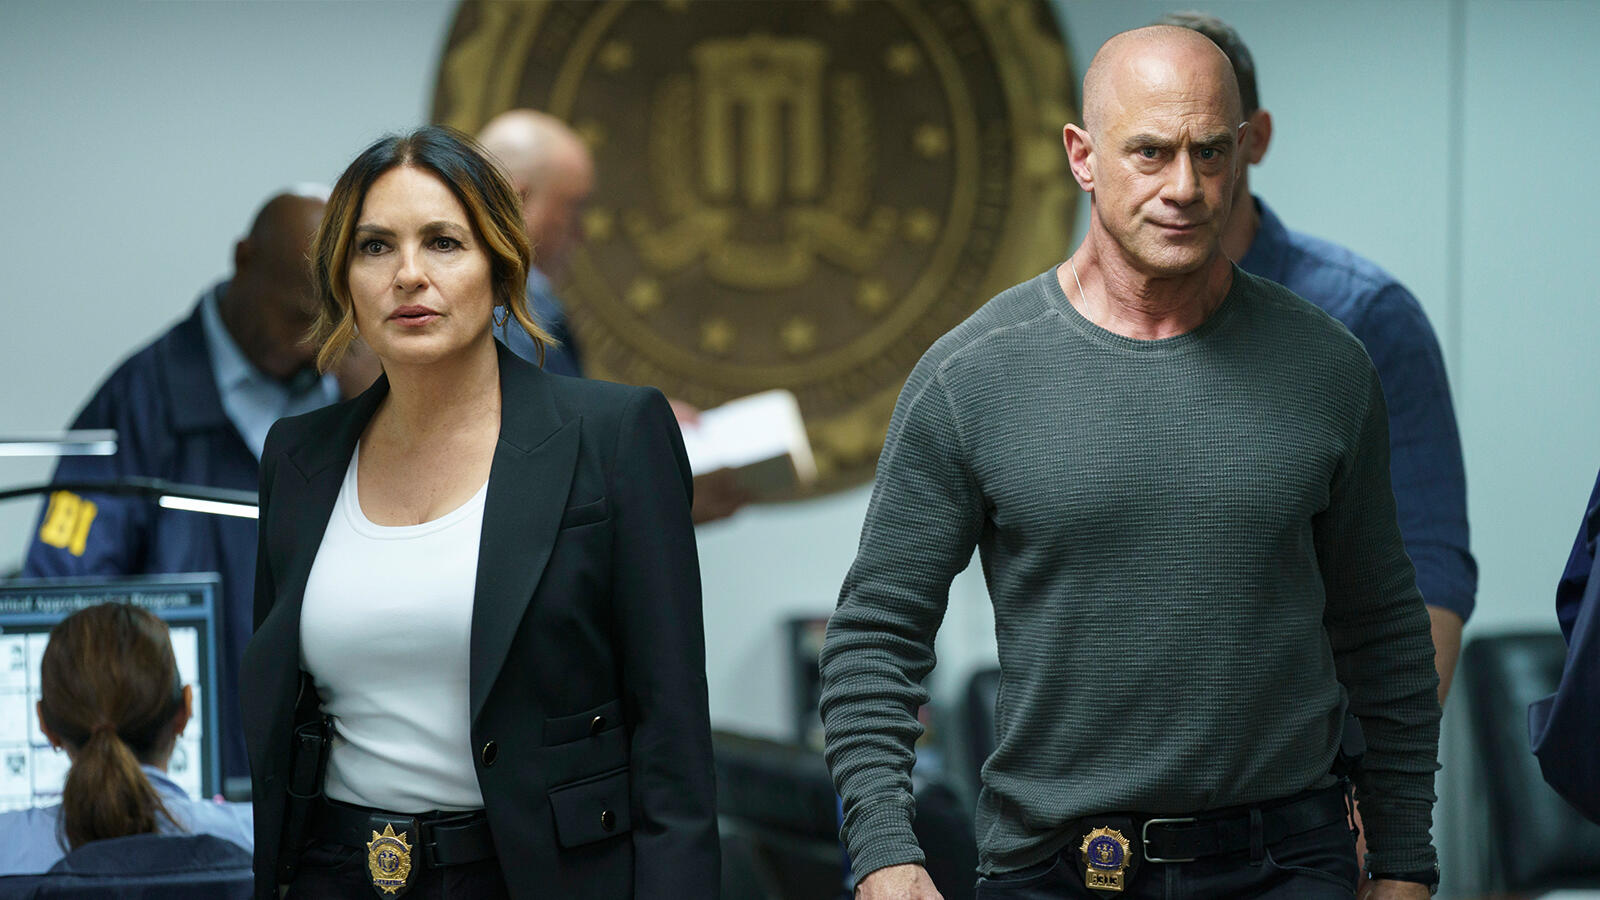 TV's Longest Drama Law & Order SVU's 25th Season Kicks Off with New Twists and Familiar Faces---